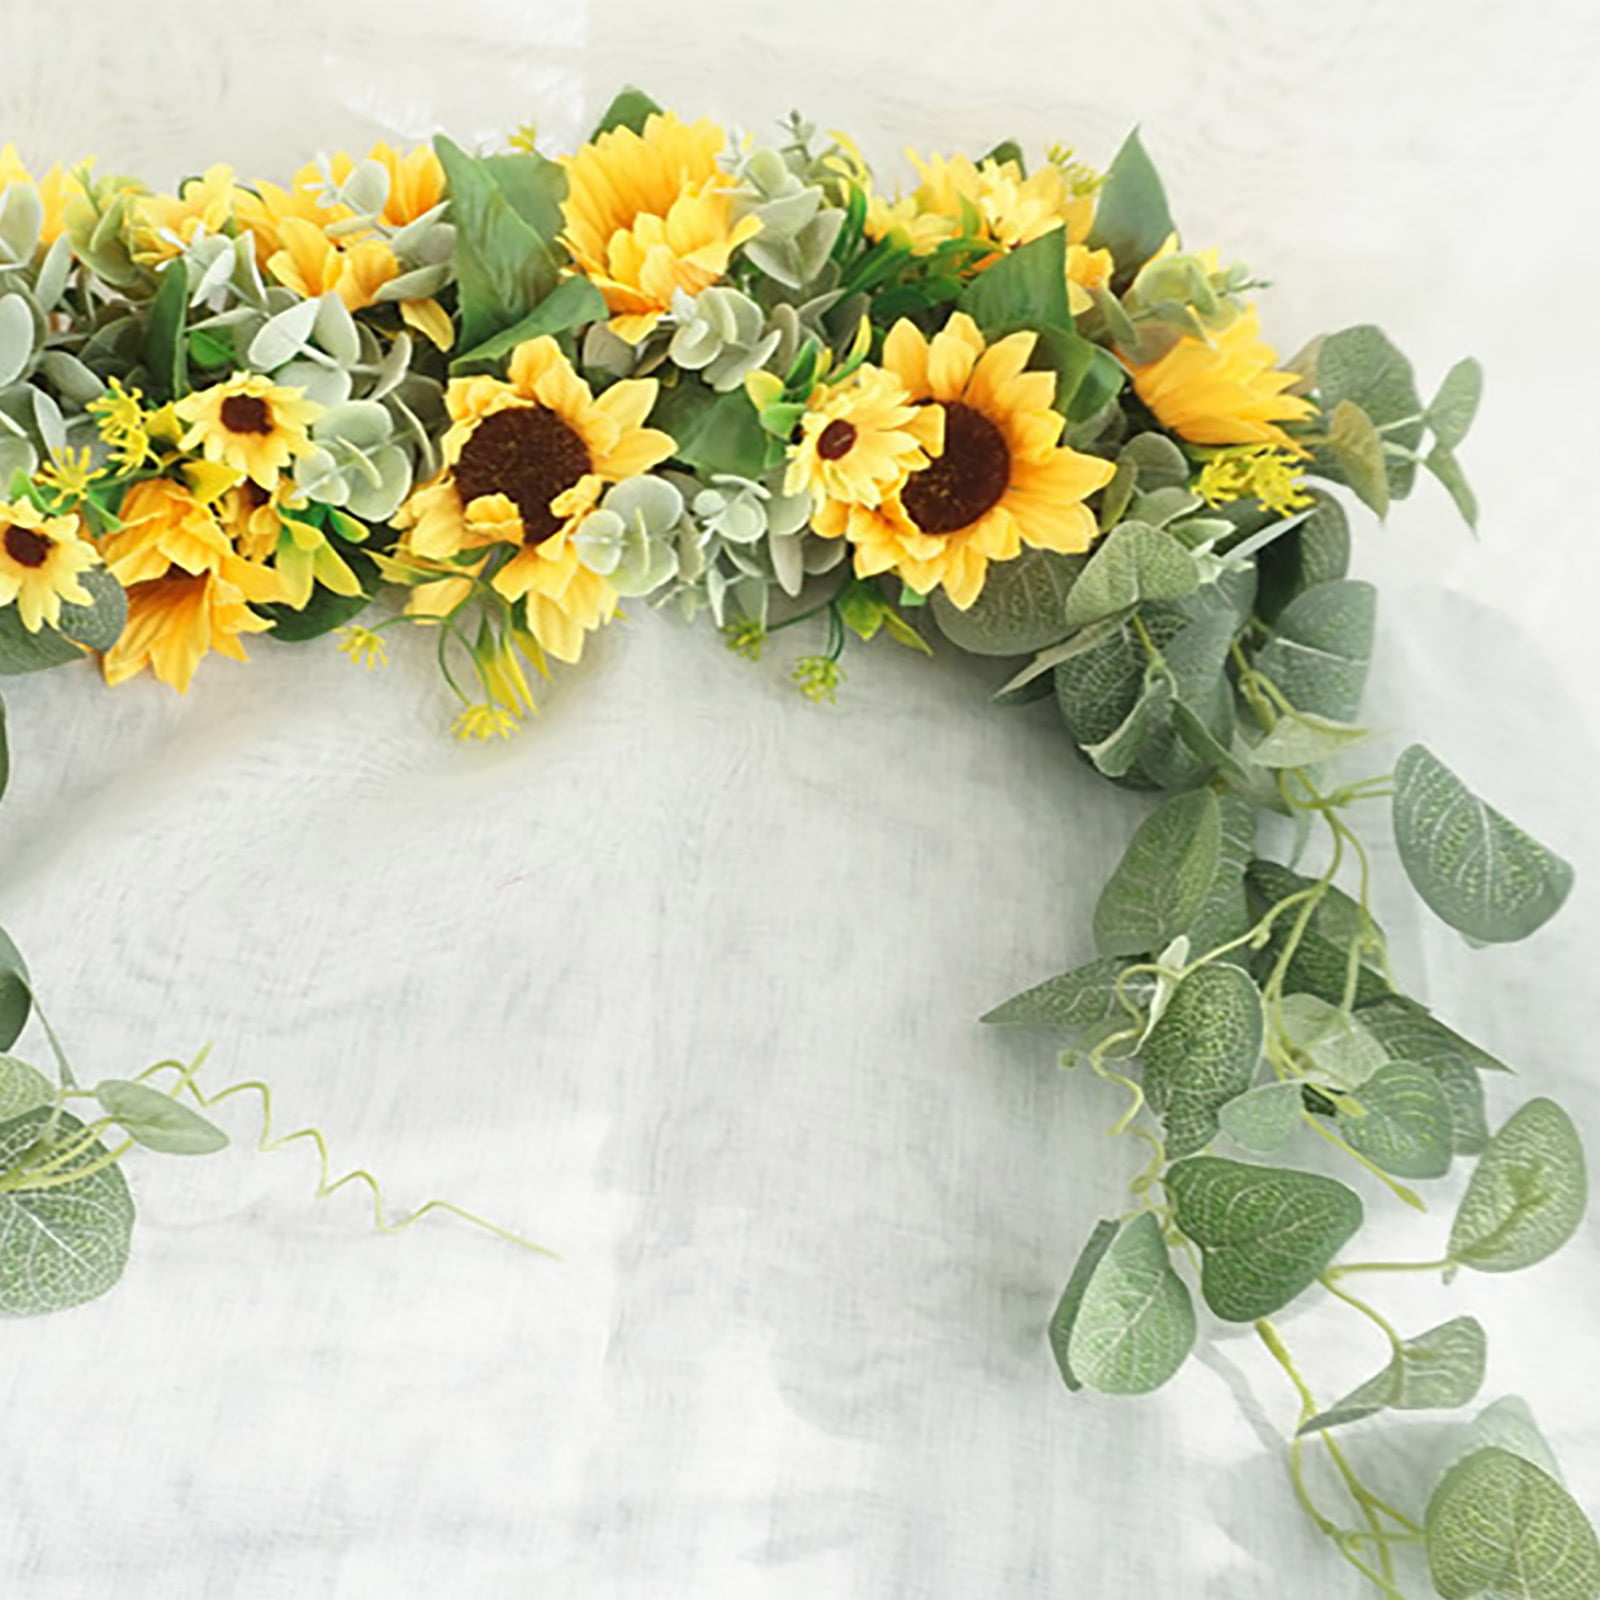 NUOBESTY Artificial Garland Iron Art Circle Simulated Flower Wreath Wall Ornament Artificial Flowers with Green Leaves Hanging Sunflowers for Wedding New Year Holiday Spring Scene Layout